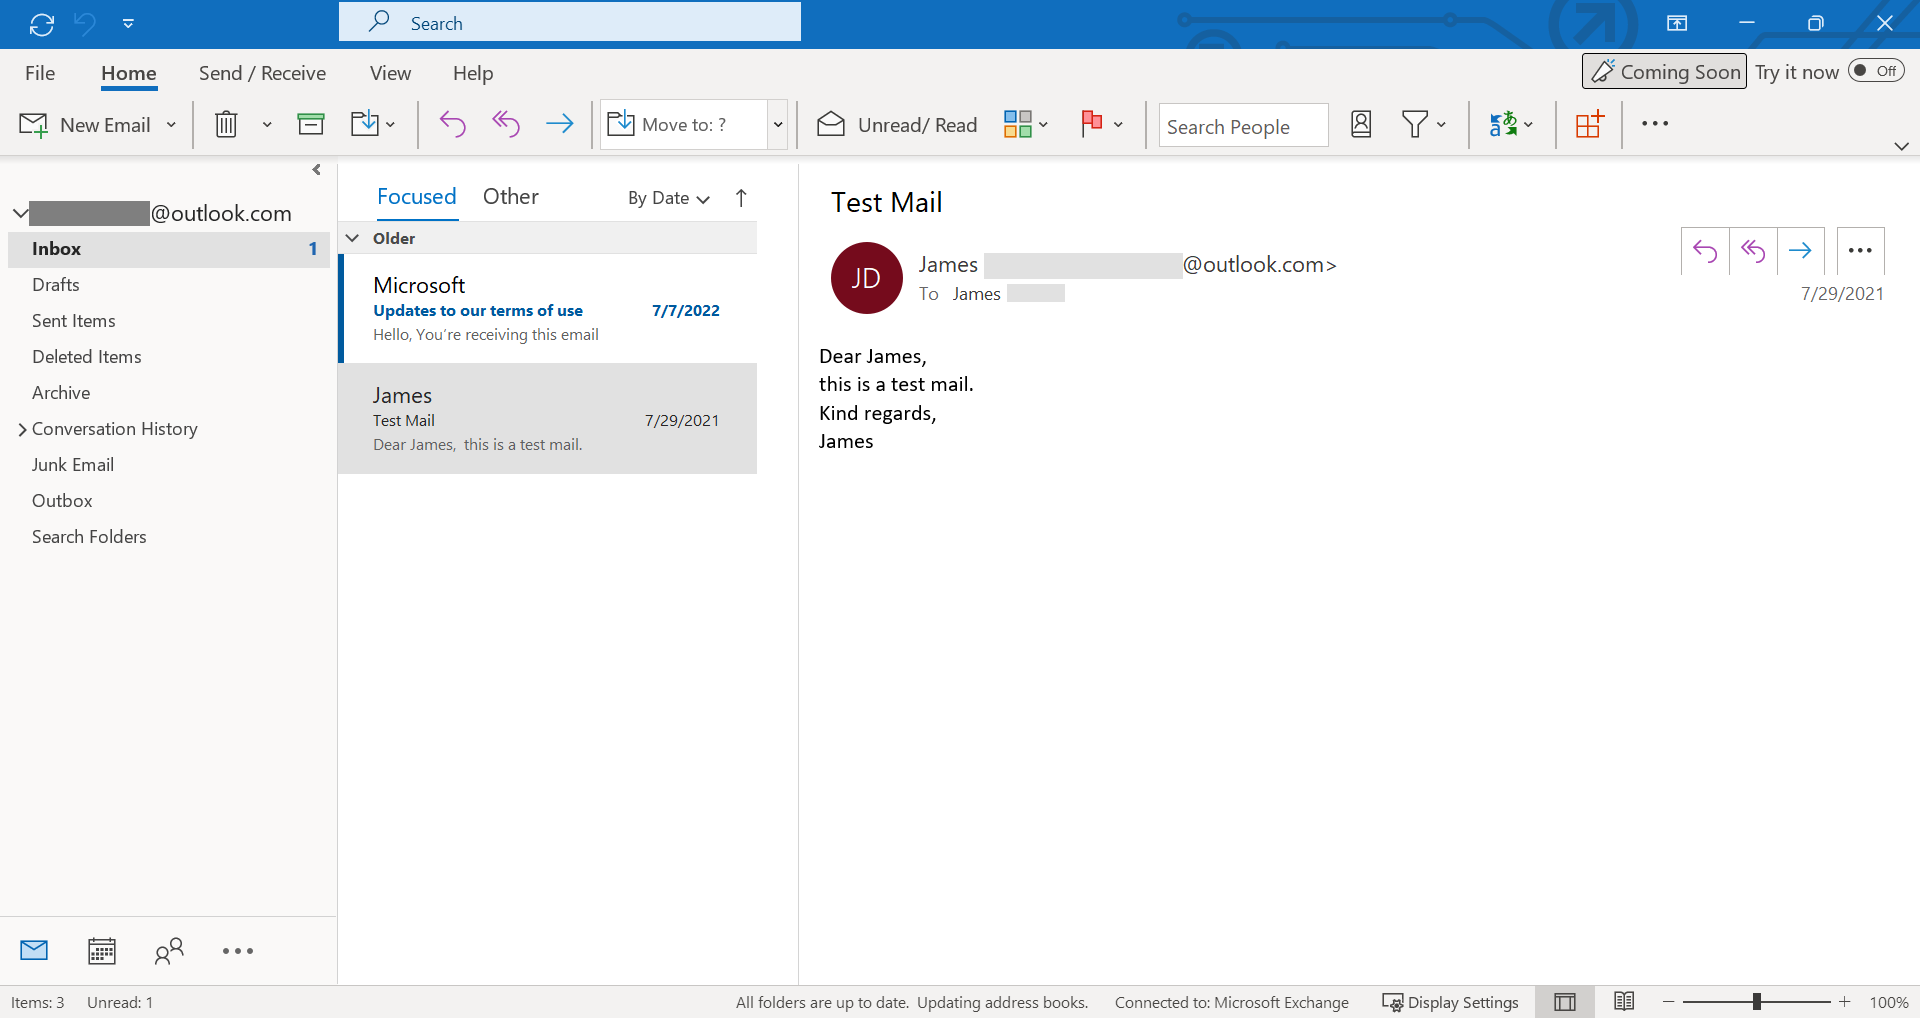 Overview of Outlook mail